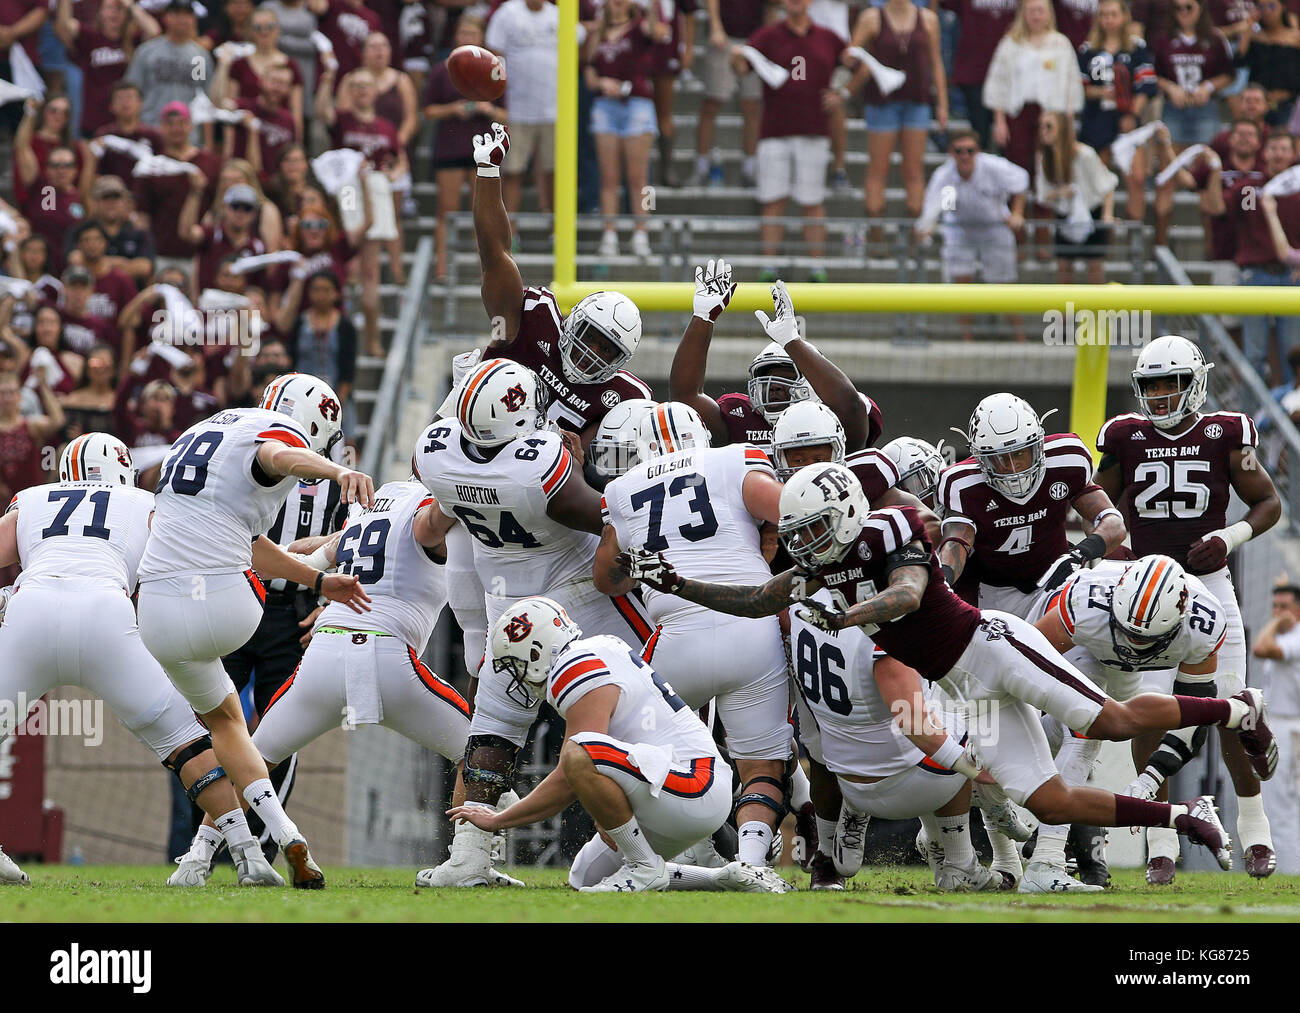 November 4, 2017: Texas A&M Aggies defensive lineman Justin Madubuike (95) blocks a field goal attempt by the Auburn Tigers in the first quarter during the NCAA football game between the Auburn Tigers and the Texas A&M Aggies at Kyle Field in College Station, TX; John Glaser/CSM. Stock Photo